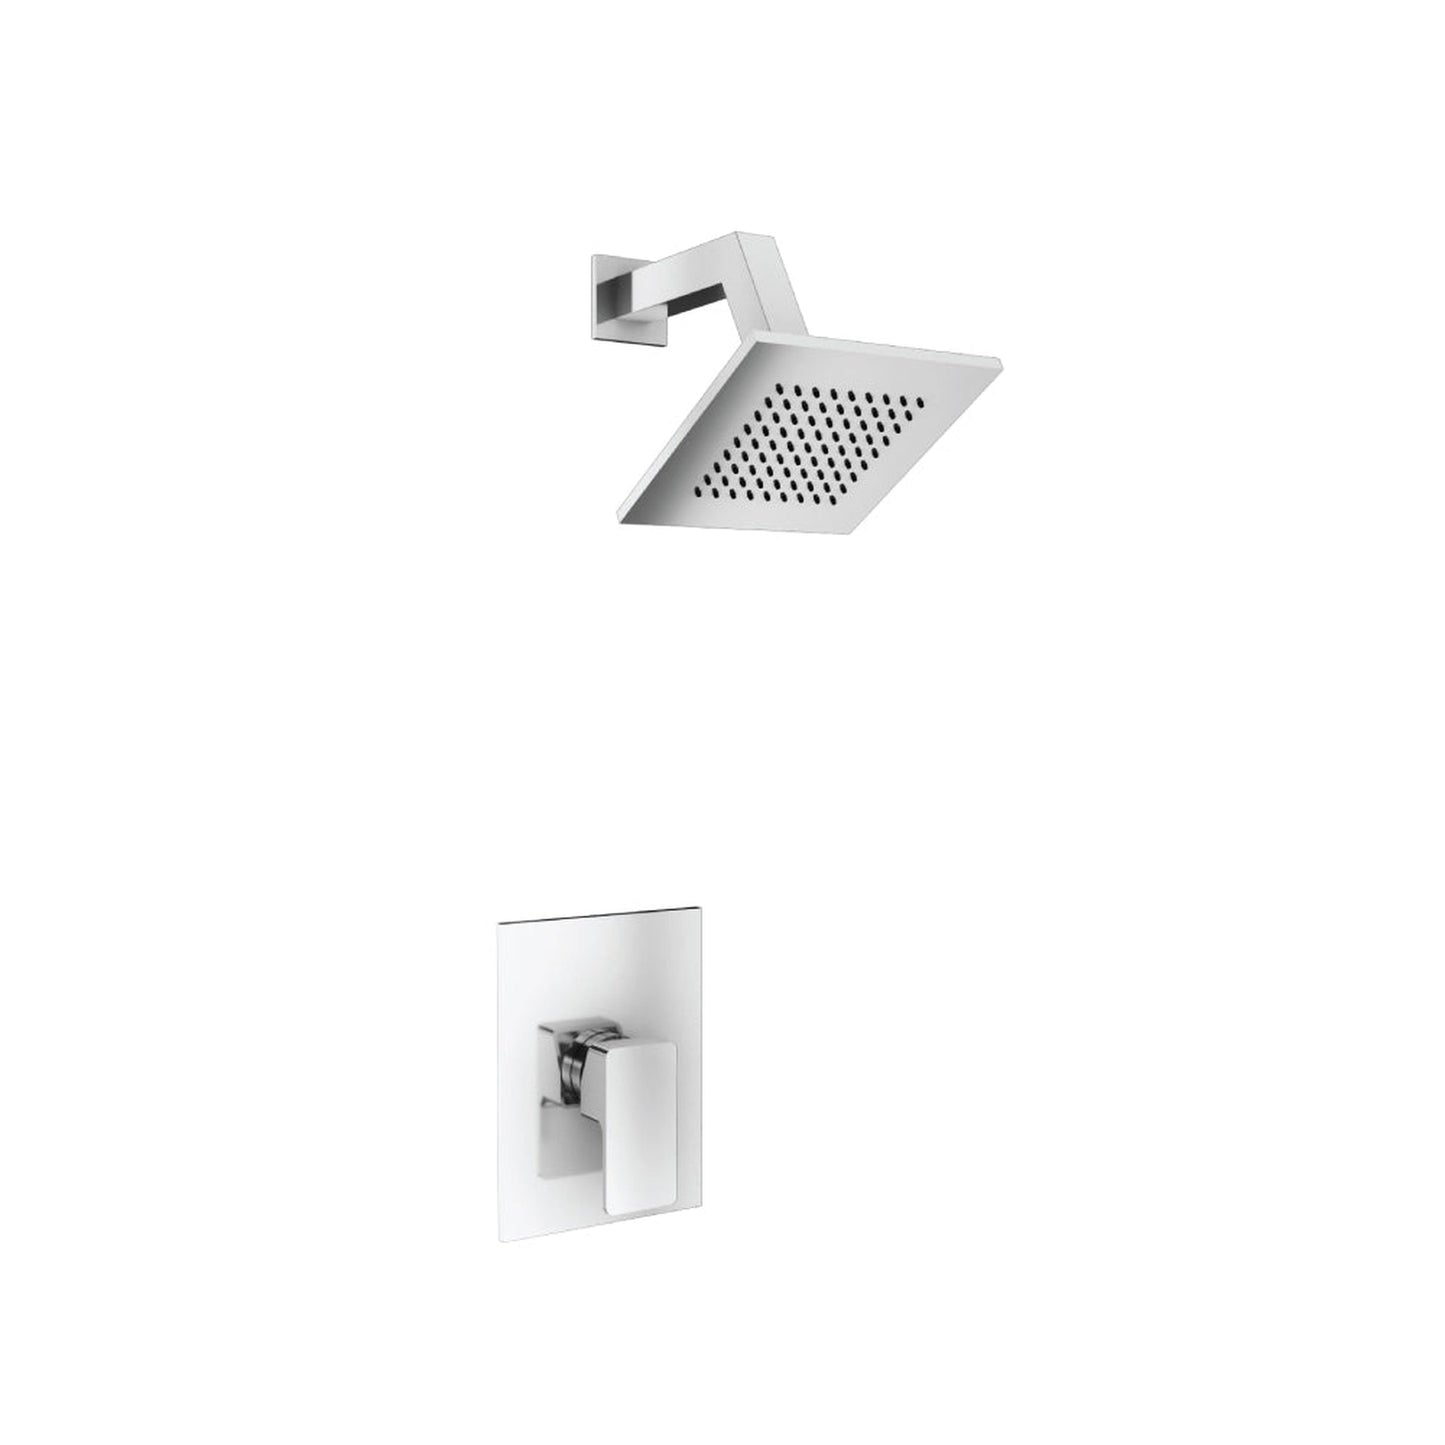 Isenberg Serie 196 Single Output Polished Nickel PVD Wall-Mounted Shower Set With 6" Solid Brass Rainhead Shower Head, Single Handle Shower Trim and 1-Output Single Control Pressure Balance Valve